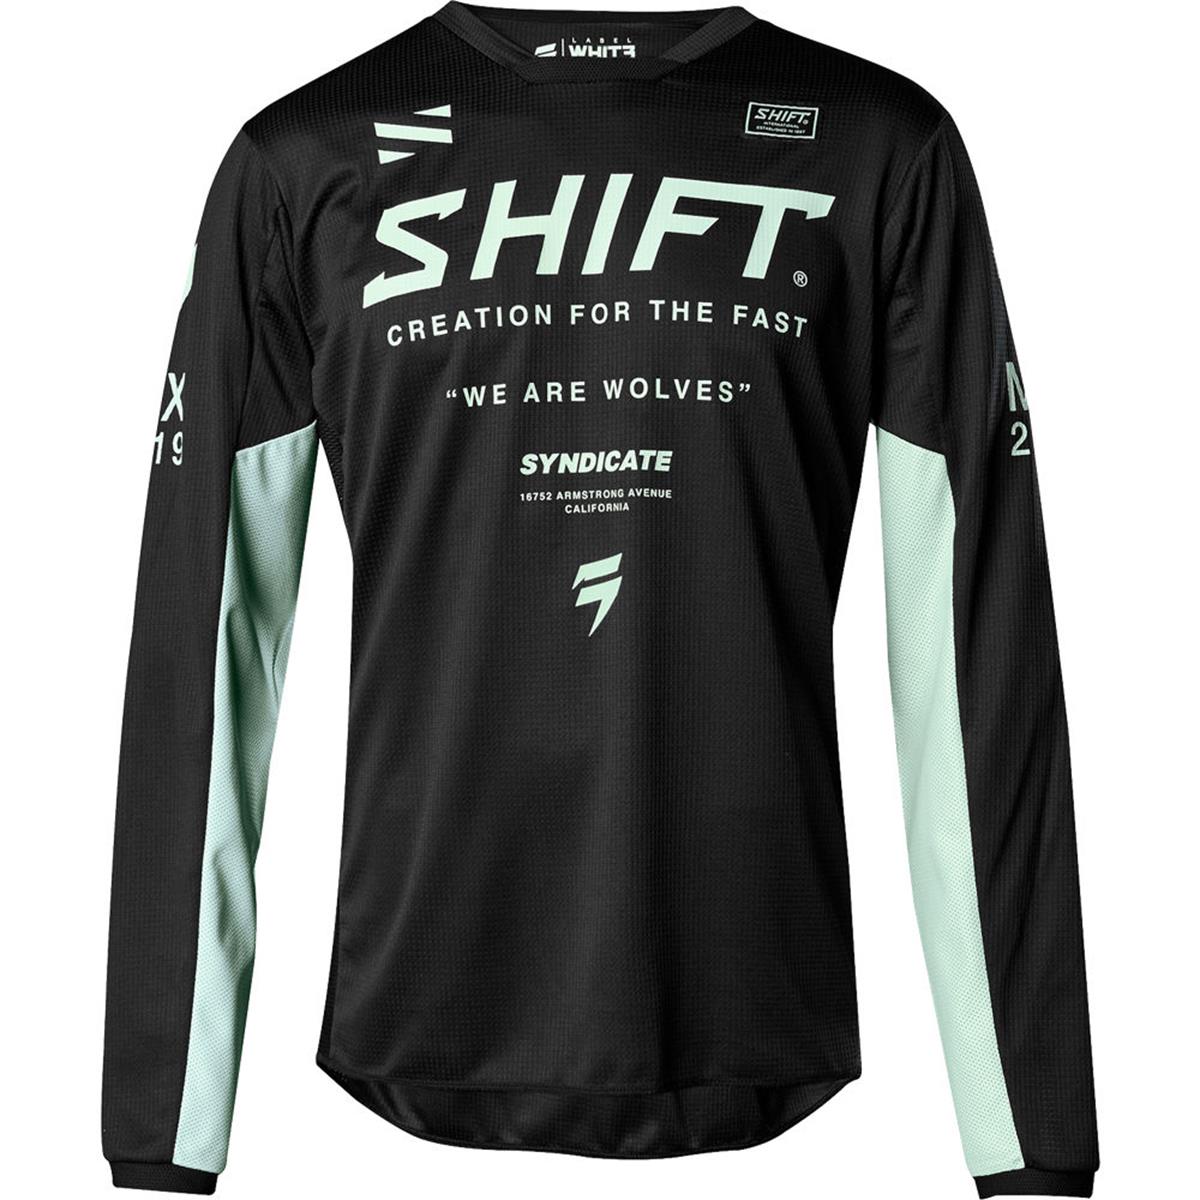 Shift Jersey Whit3 Label Iceland Schwarz/Mint - Limited Edition